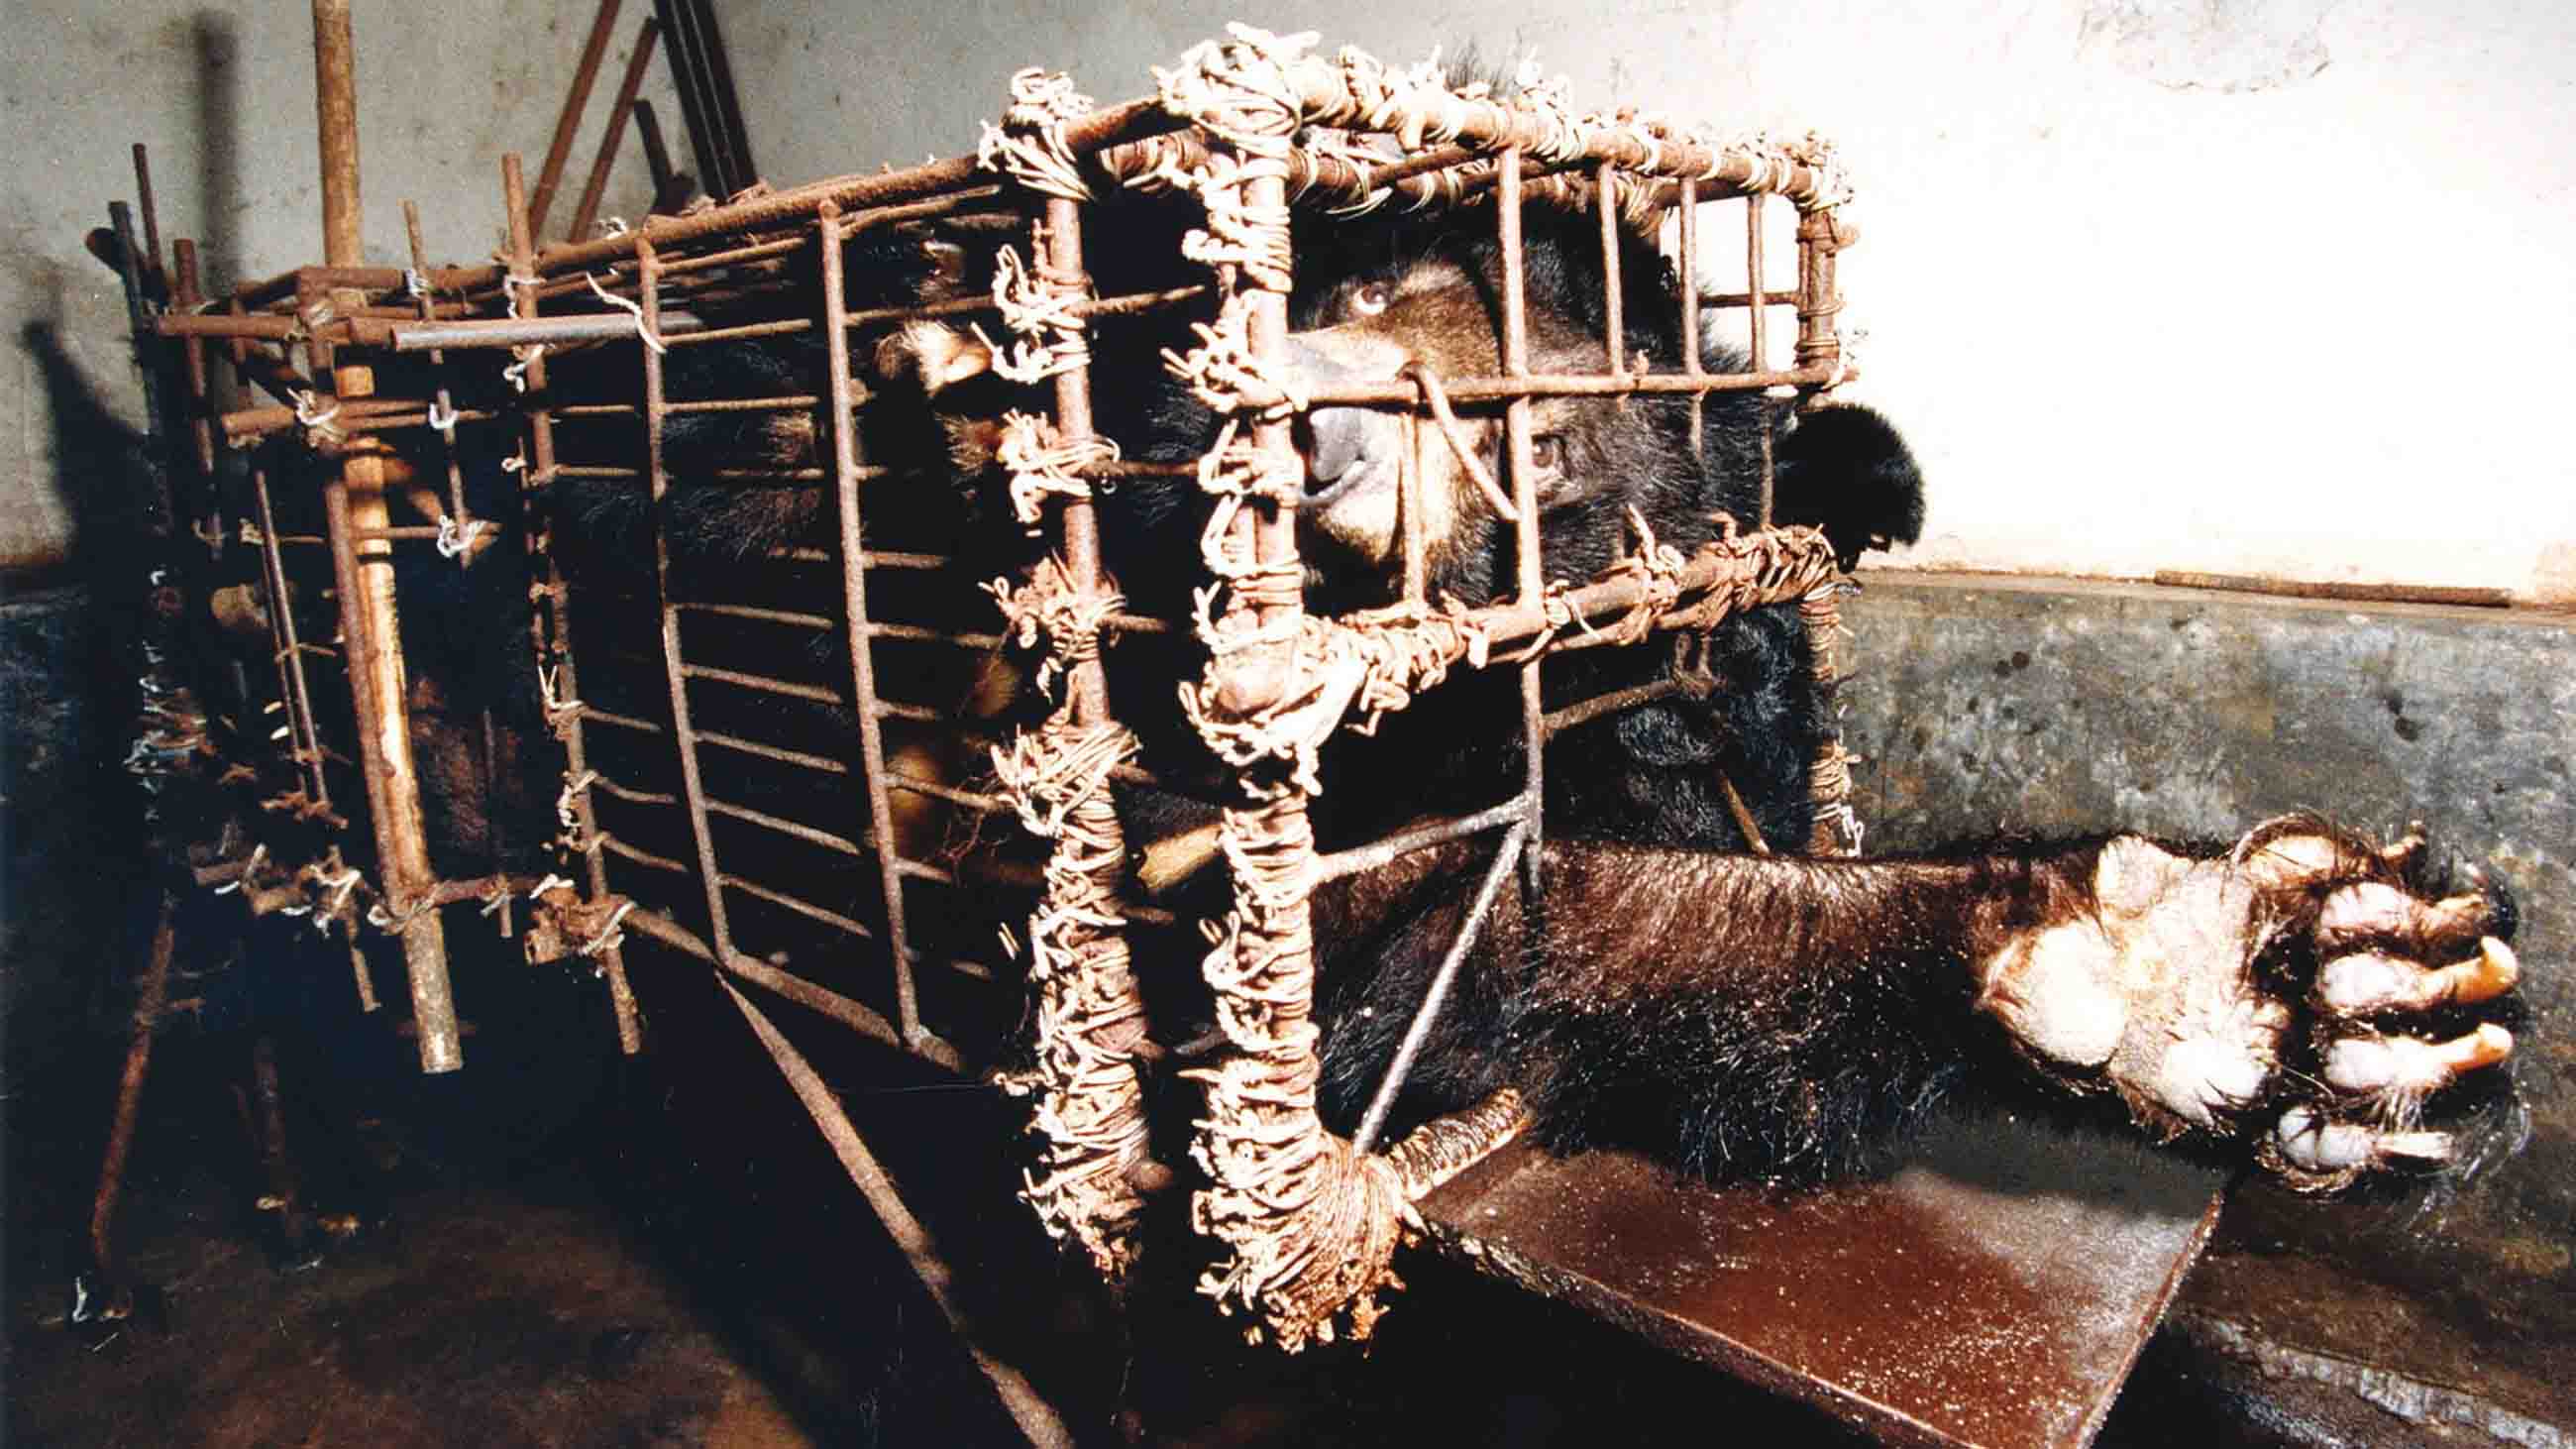 For about 30 years now, bears have been squeezed into cages on farms as their bile is harvested.